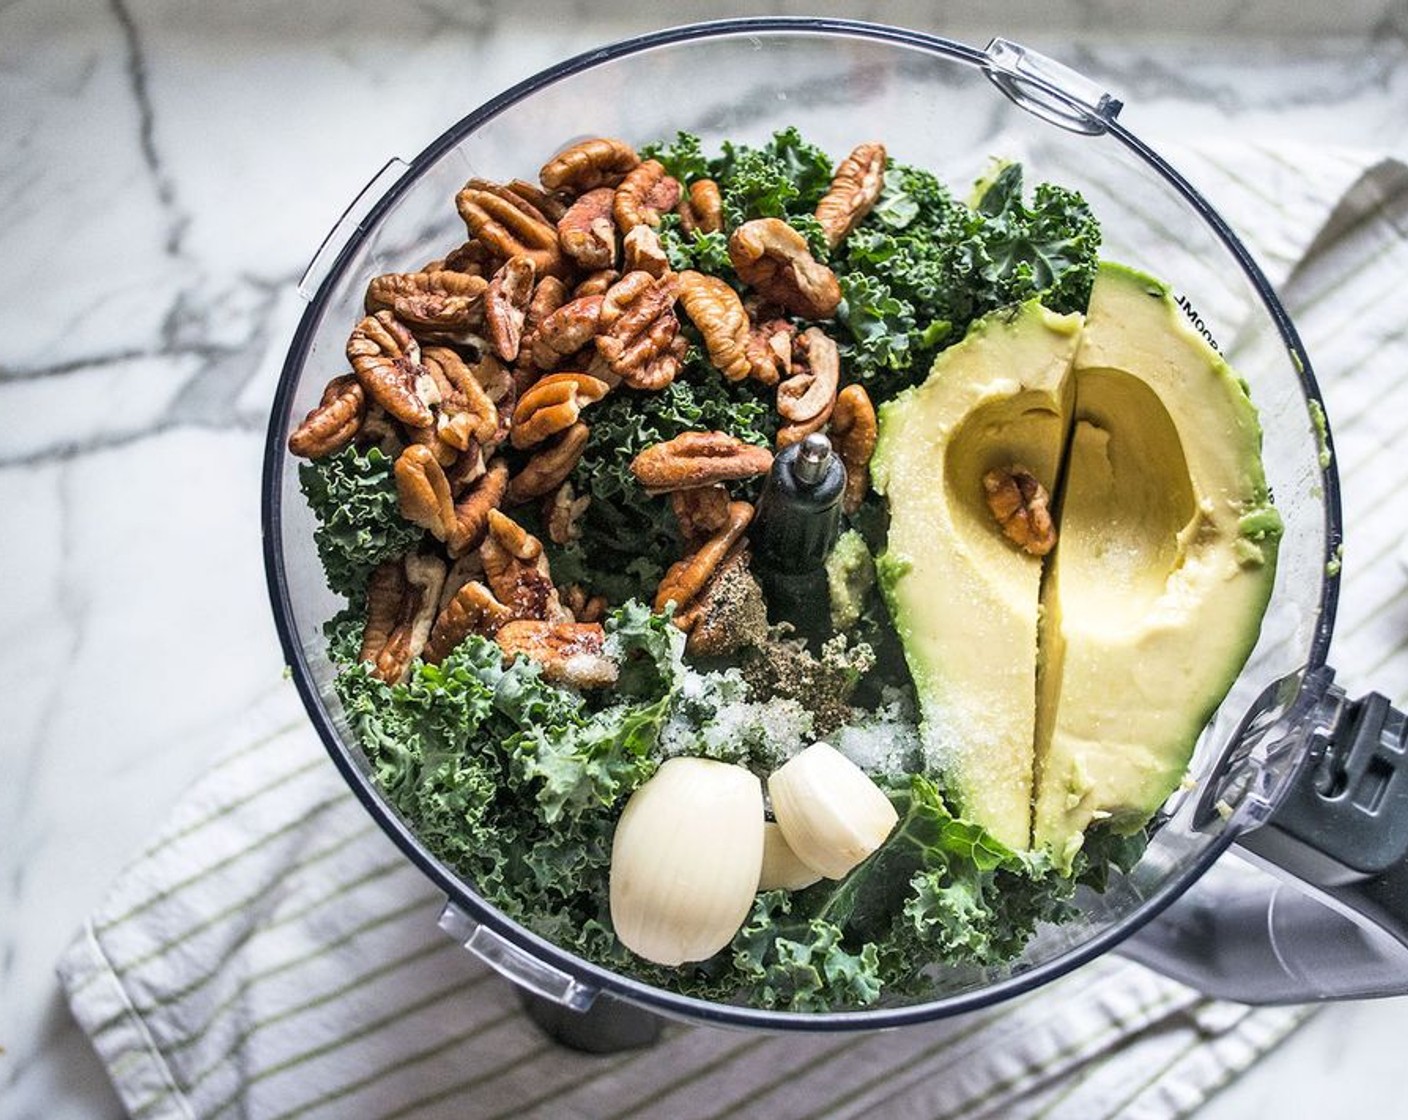 step 1 Add Kale (3 cups), Avocado (1/2), Unsalted Raw Pecans (1/2 cup), Grated Parmesan Cheese (1/3 cup), Garlic (2 cloves), juice of Lemon (1), Sea Salt (3/4 tsp) and Freshly Ground Black Pepper (1/4 tsp) to the bowl of a food processor. Process on high for 15-20 seconds, stopping to scrape down the sides and add Water (1/4 cup) until the pesto reaches preferred consistency. Taste and add more seasonings if needed.